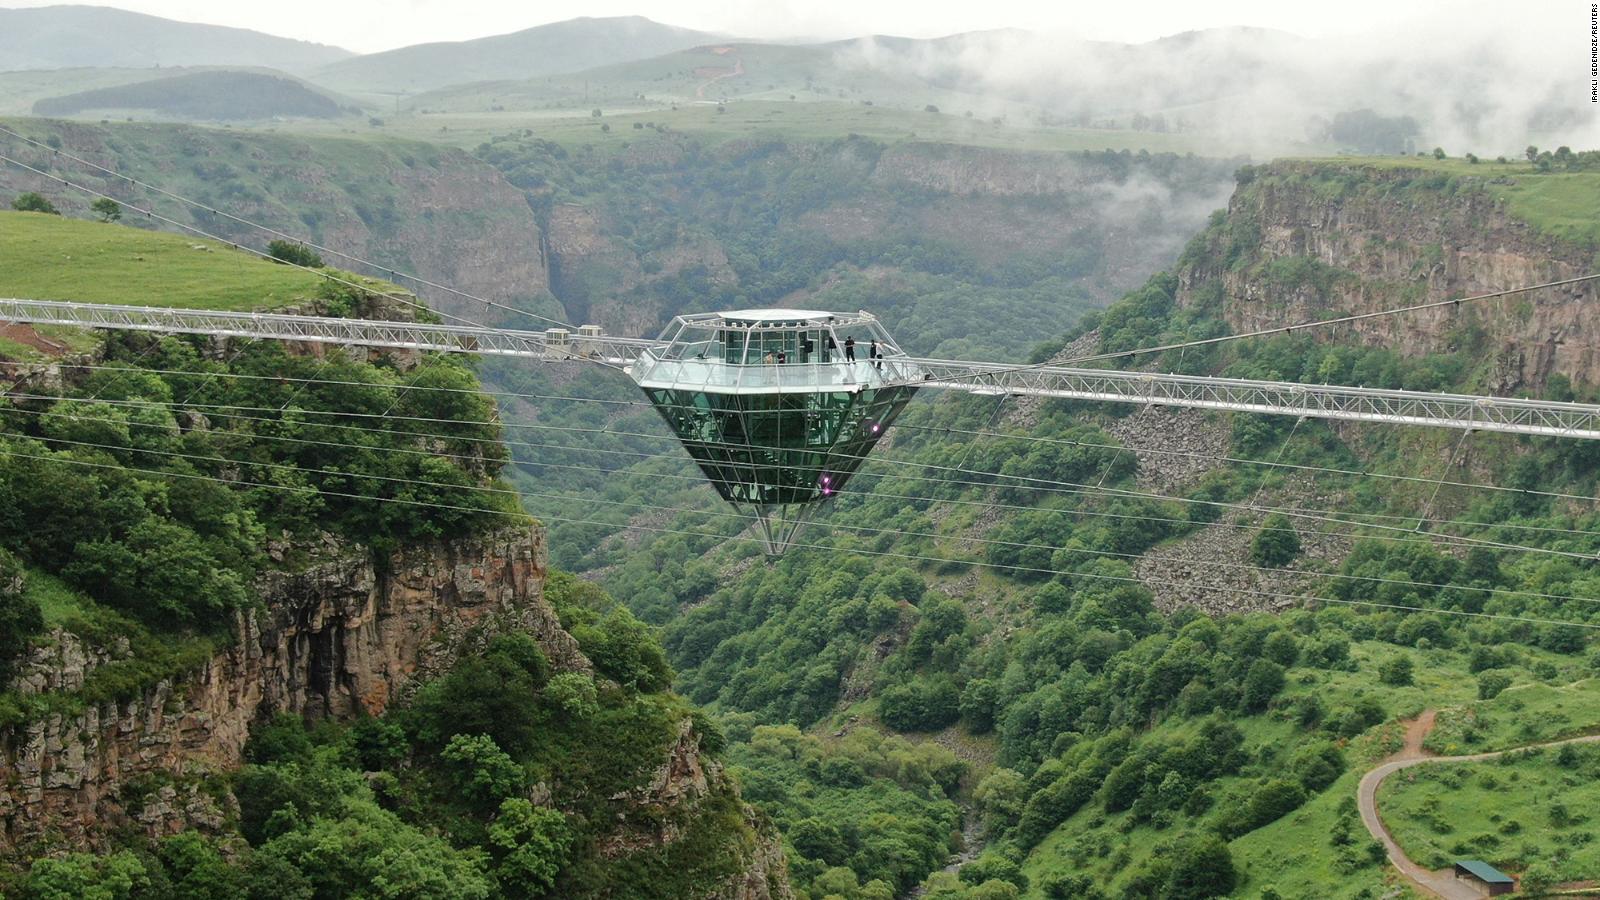 This glass bar hangs over a valley in Georgia